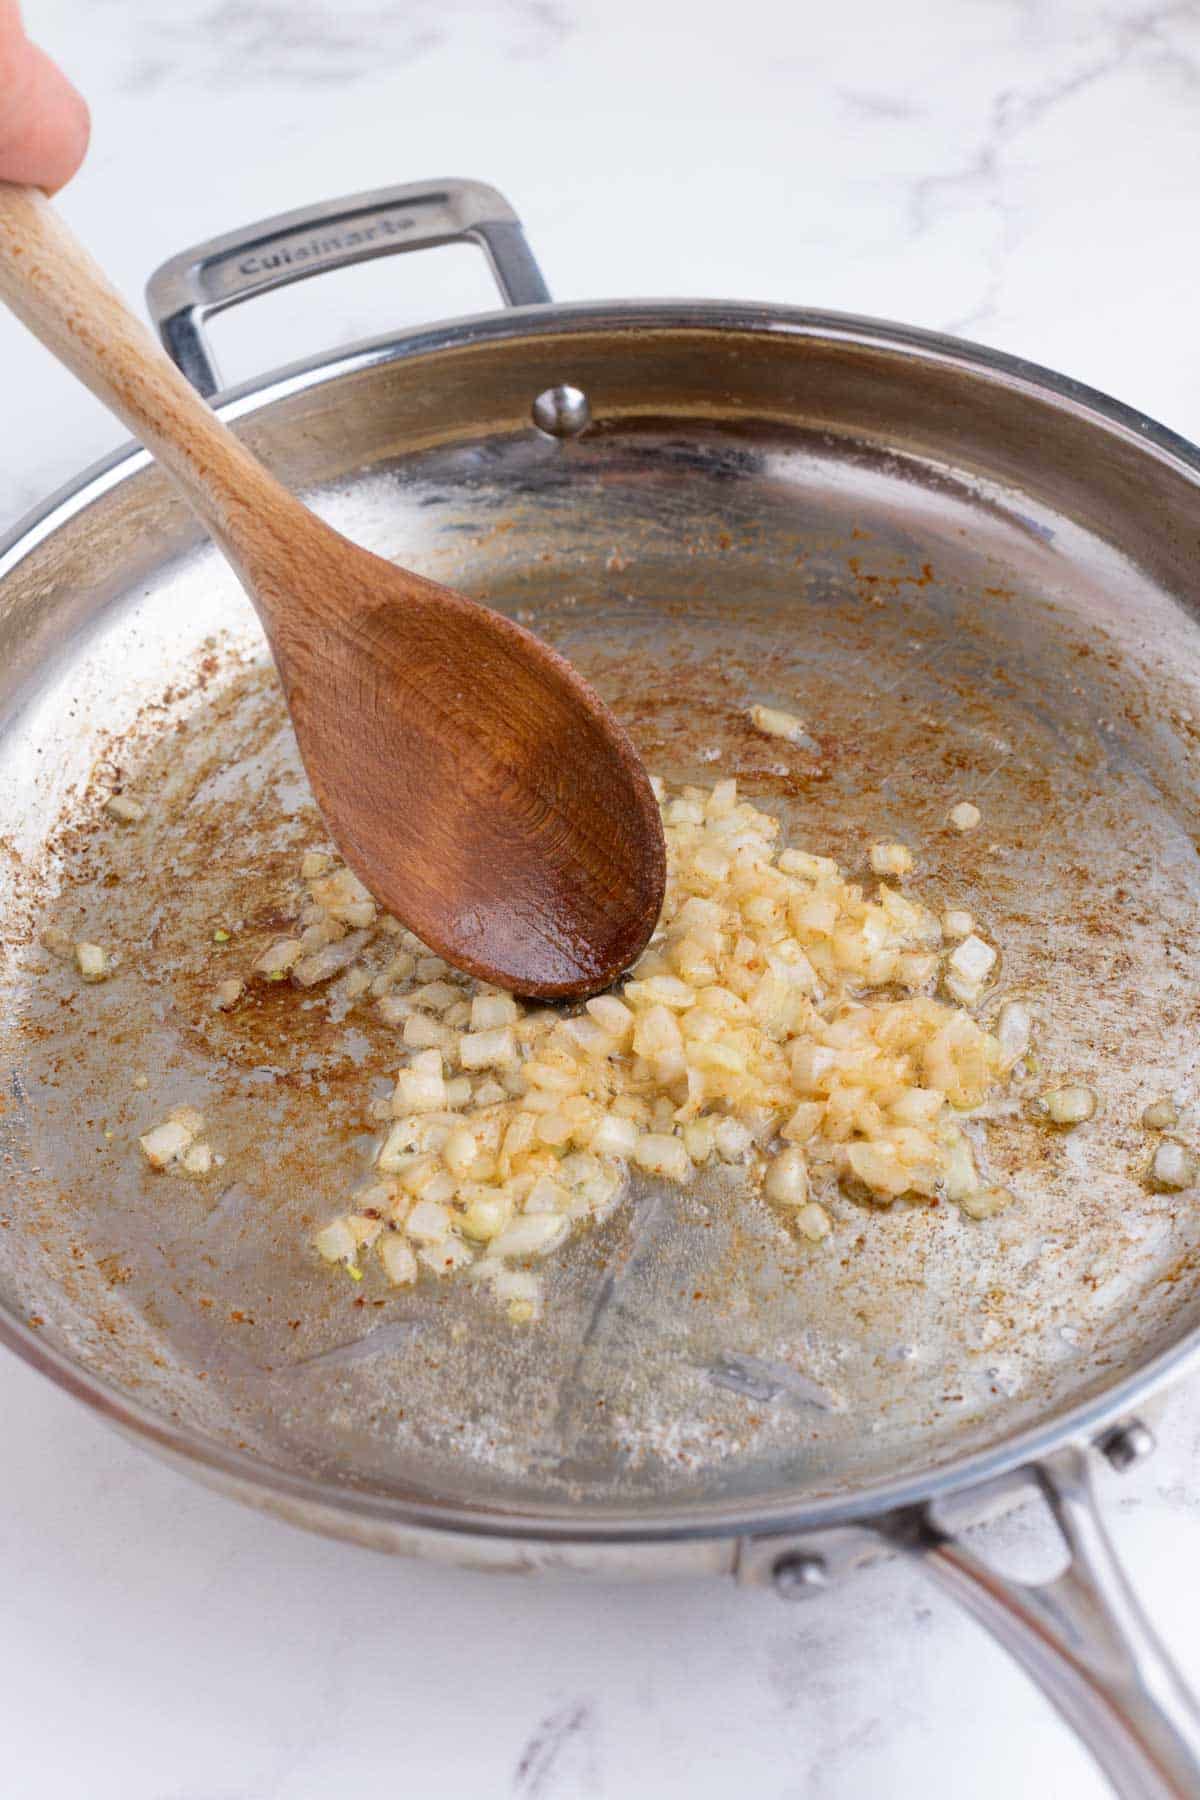 Onions are cooked in a skillet.